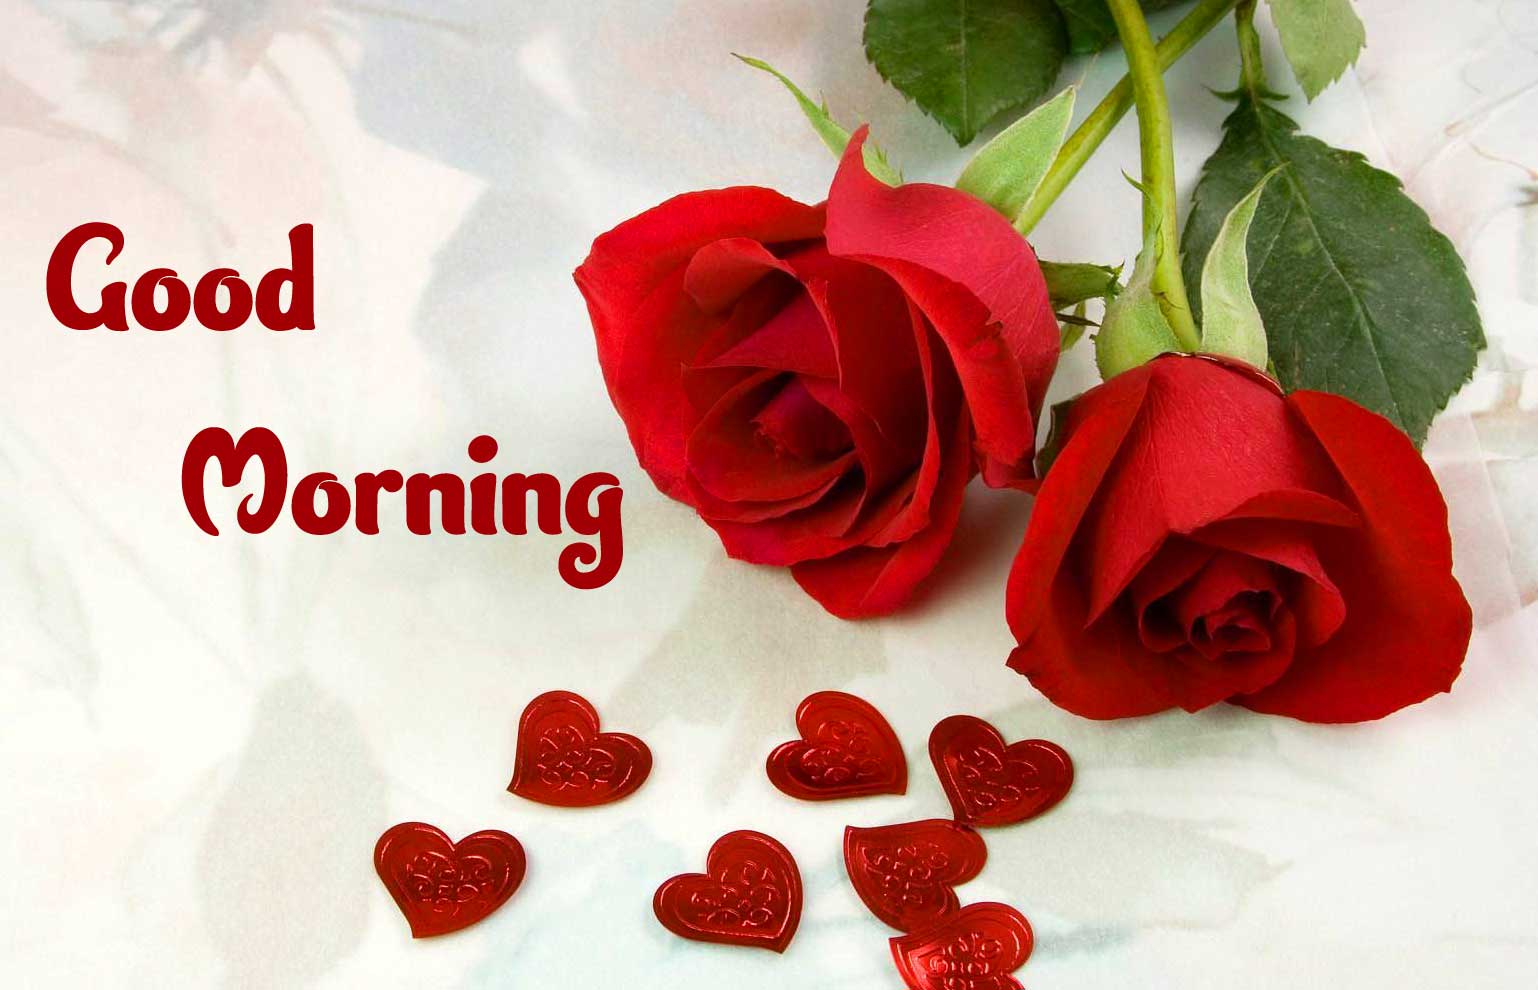 Good Morning Wallpaper Pics Wallpaper photo Download With Red Rose 